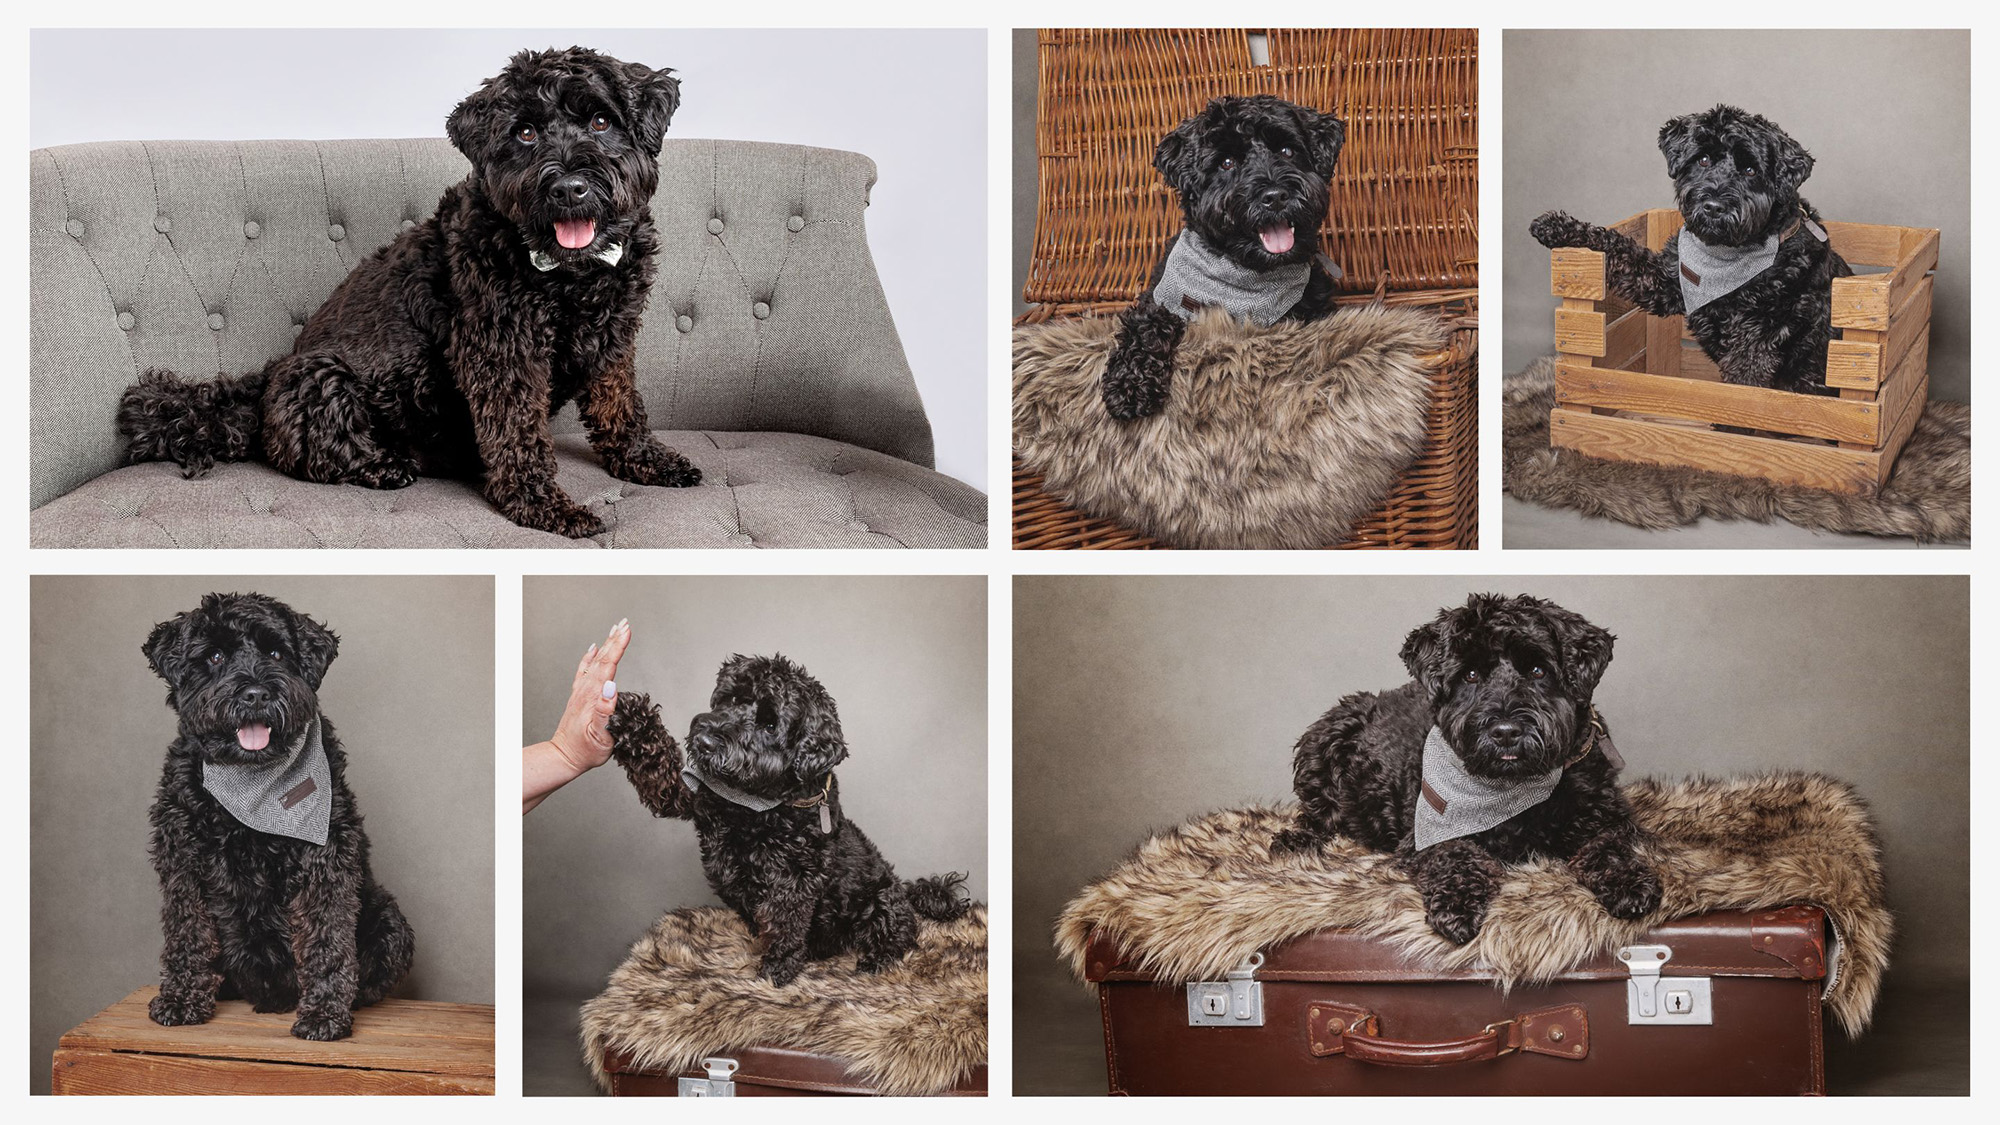 A collage of six images featuring a Schnockerpoo, curly-haired black dog in various poses on different props, including a cushioned chair, a wicker basket with fur lining, a wooden crate with fur lining, giving a high-five, and sitting on a suitcase with fur lining.